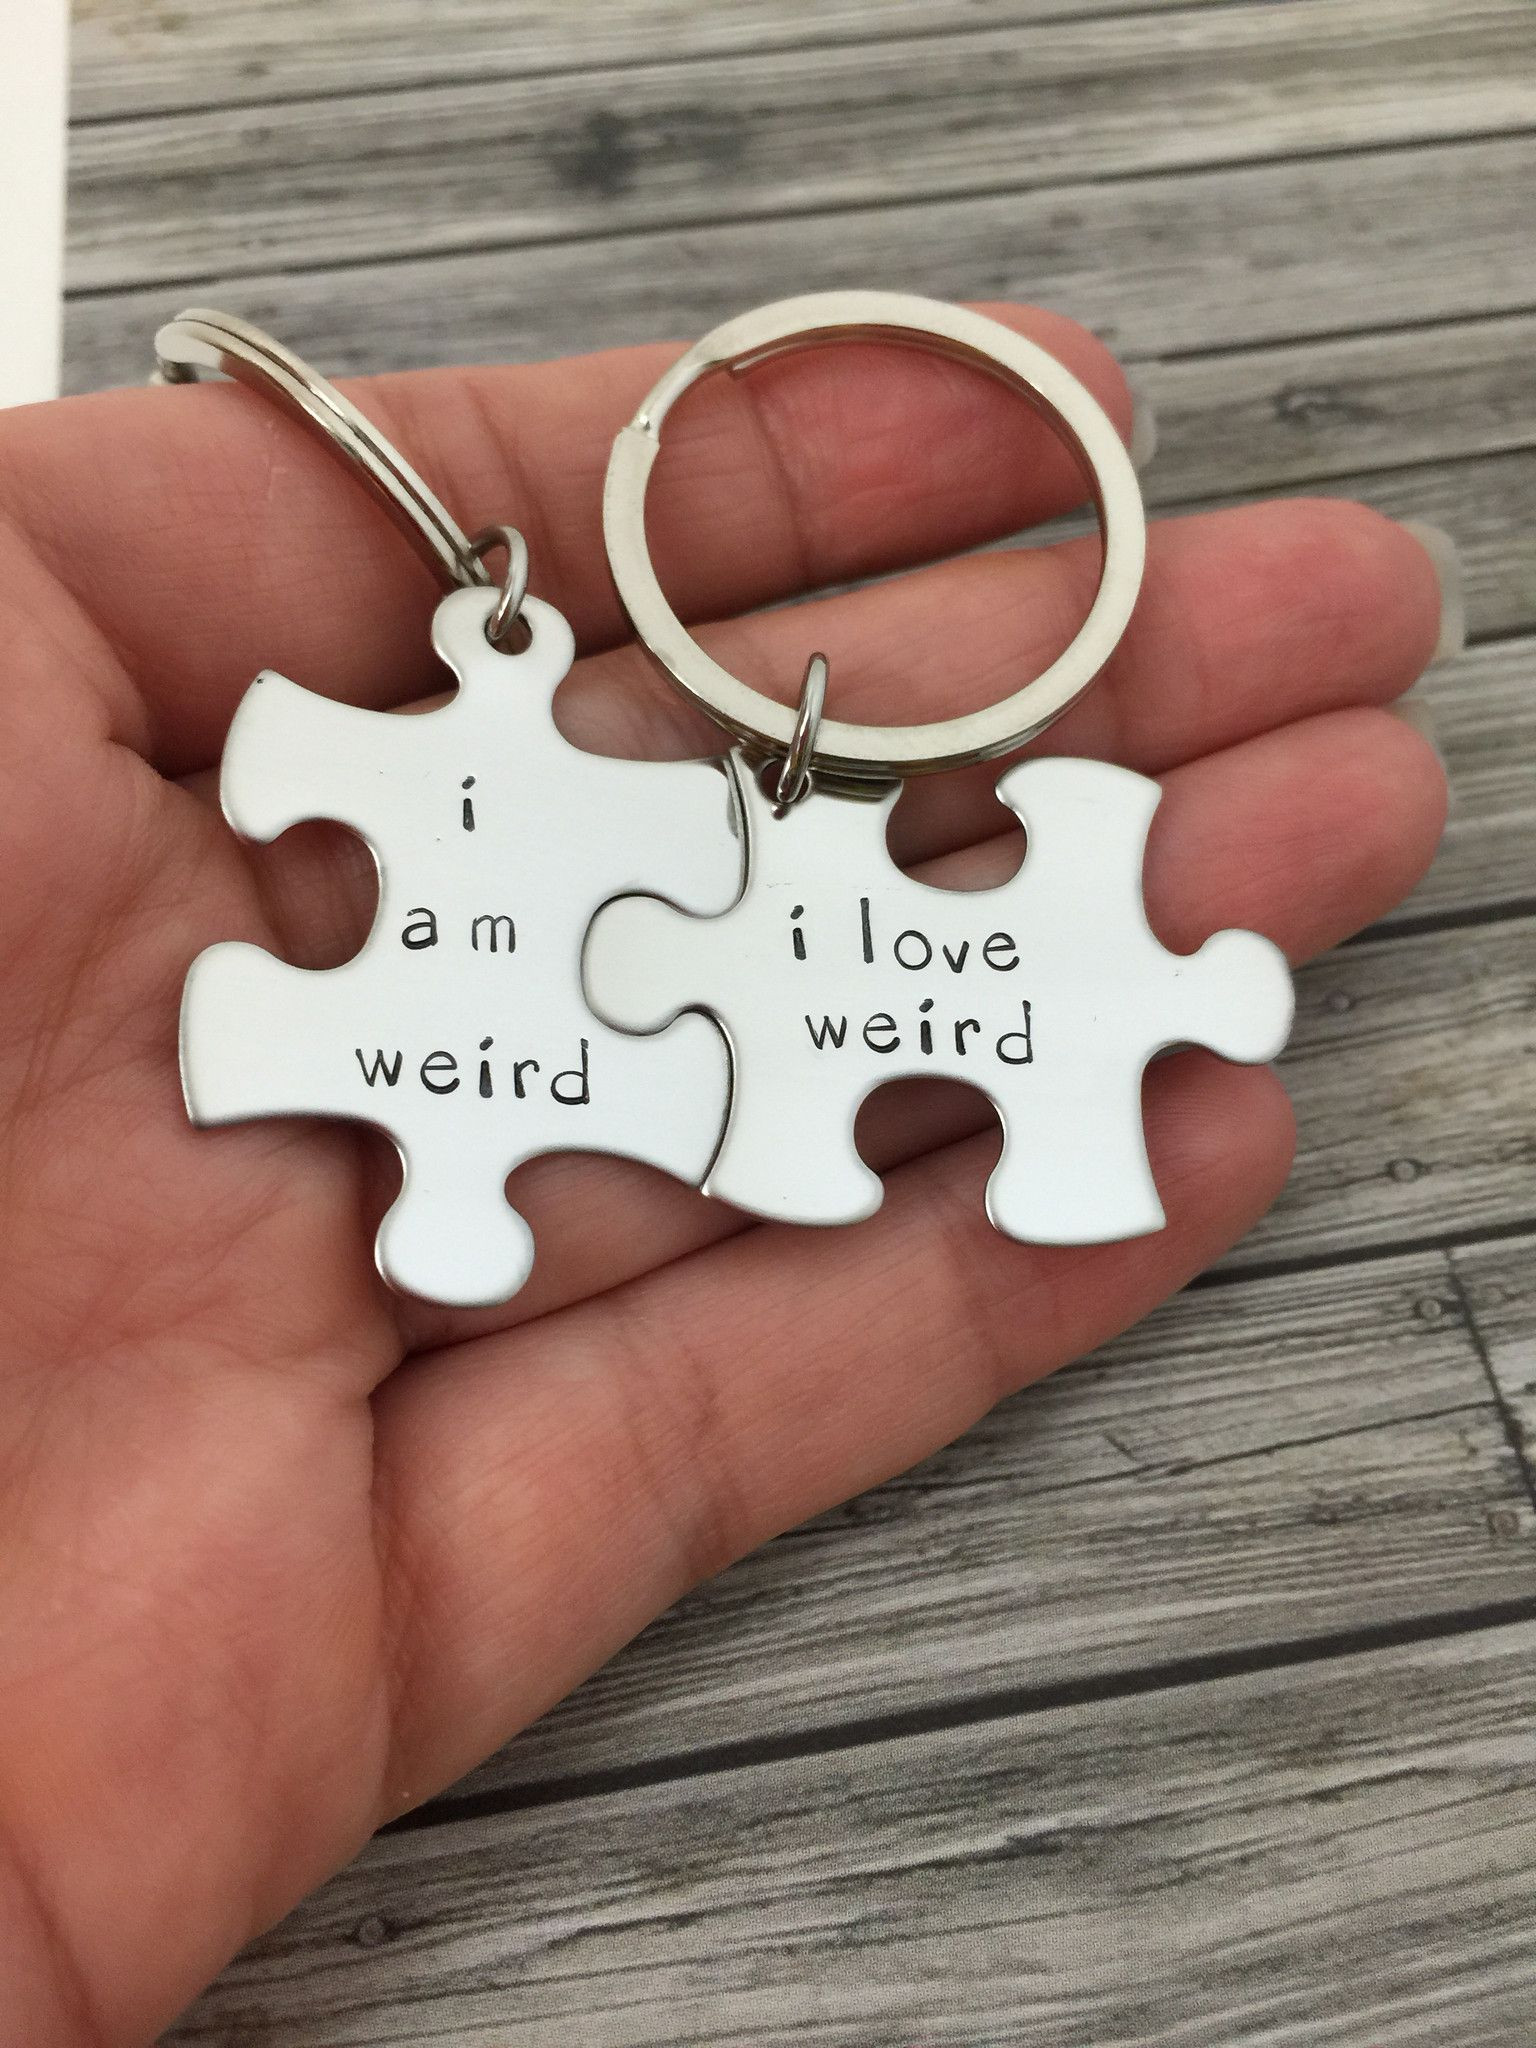 Couple Gift Ideas For Anniversary
 I am weird I love weird Couples Keychains Couples Gift